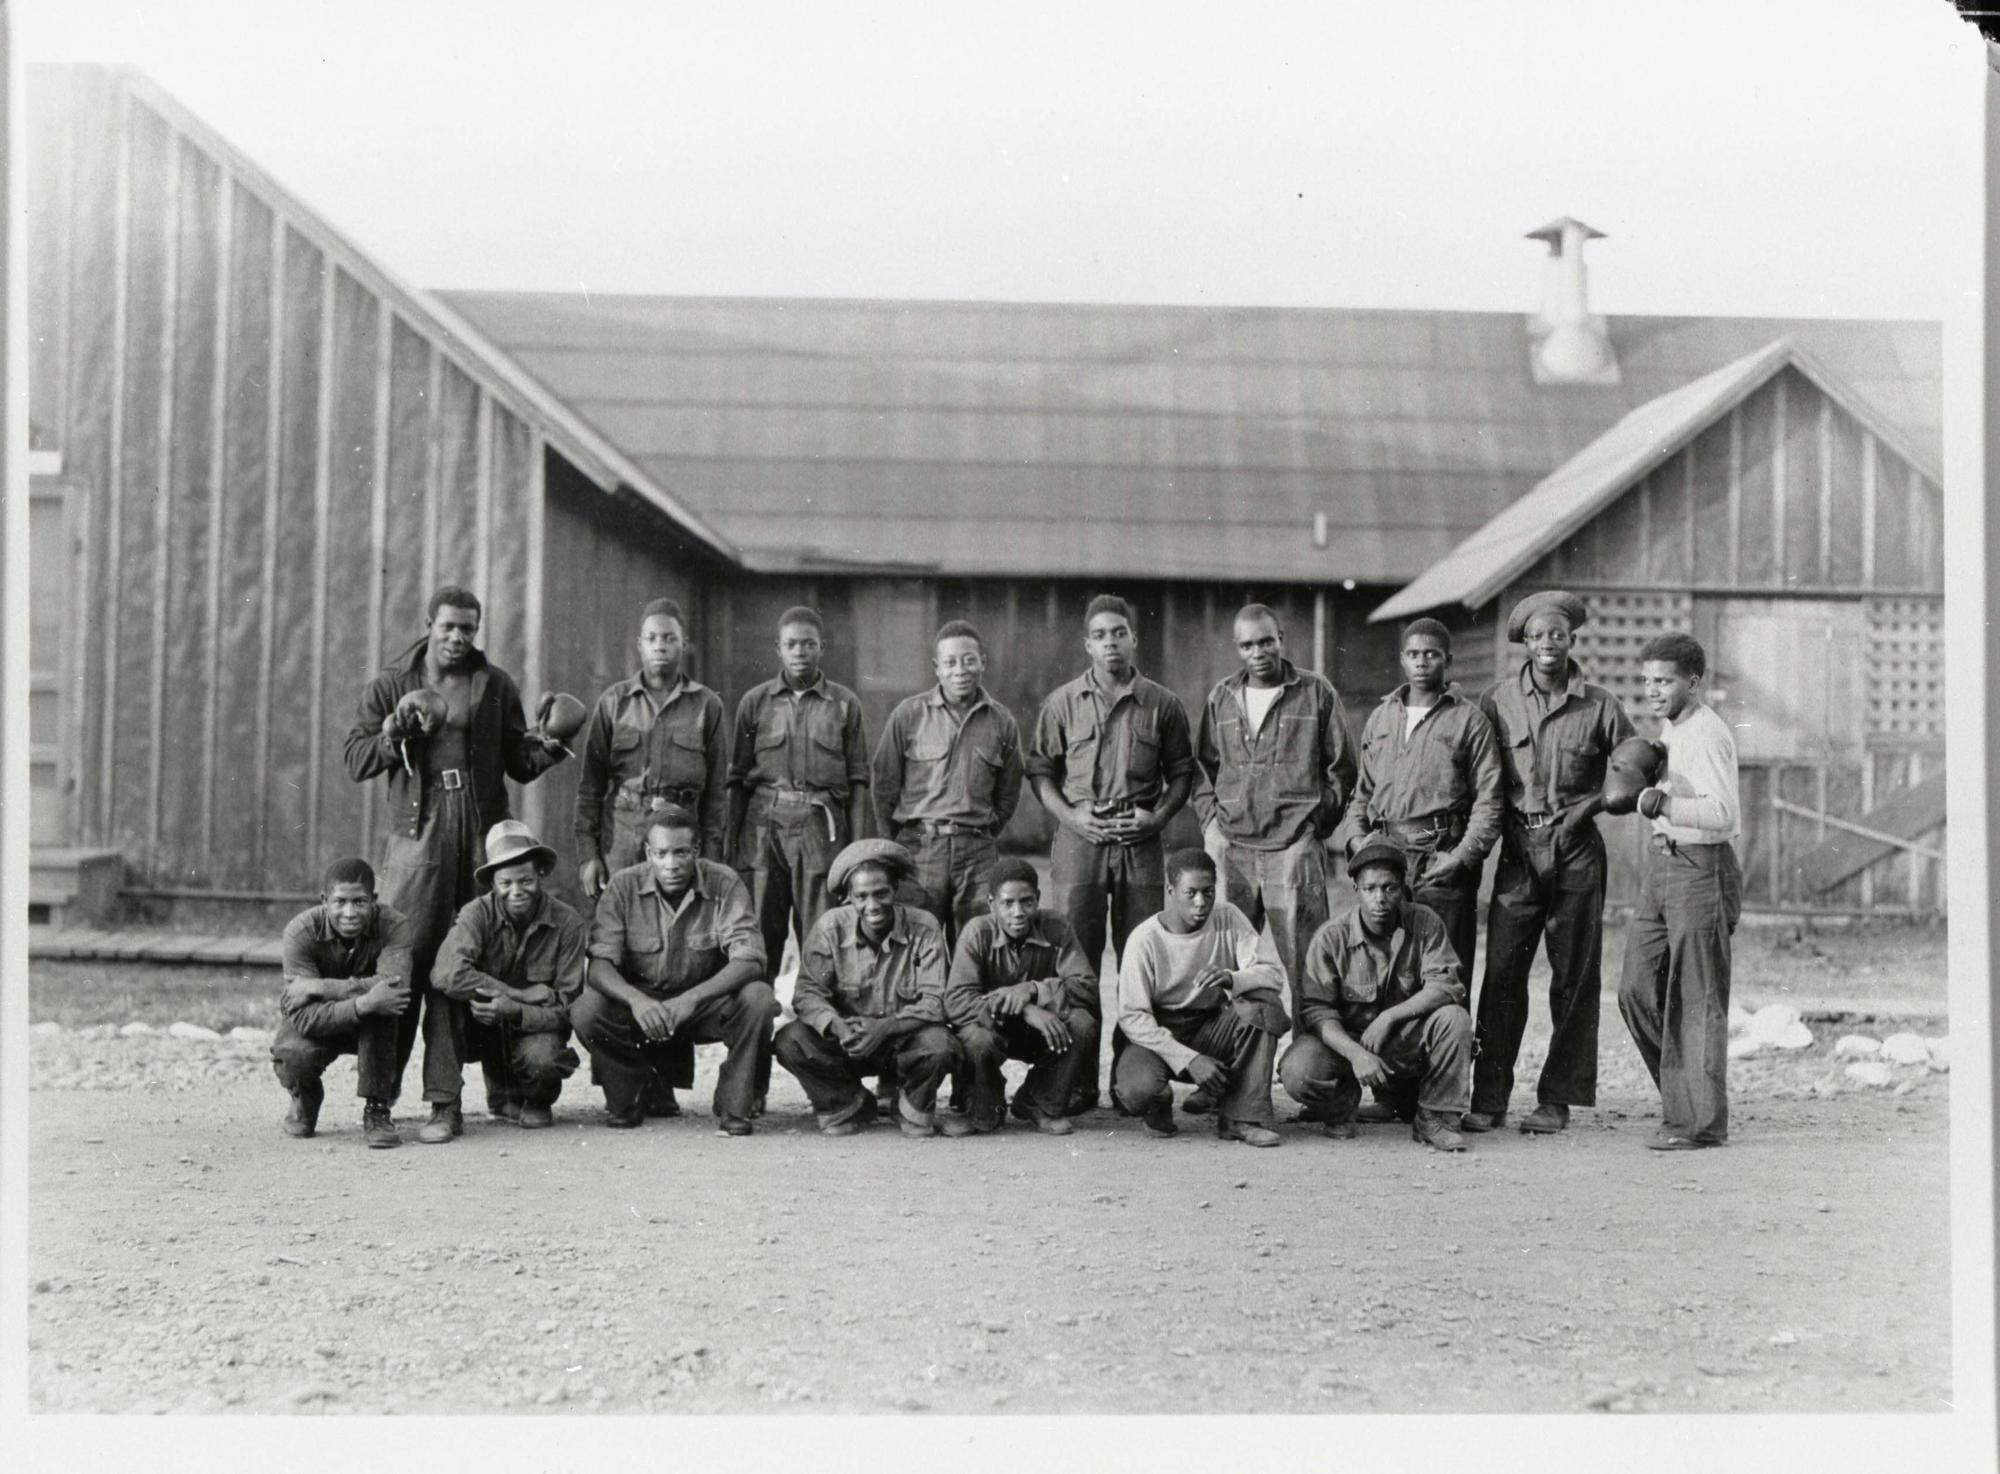 Archival image of a group of men posing in front of a building